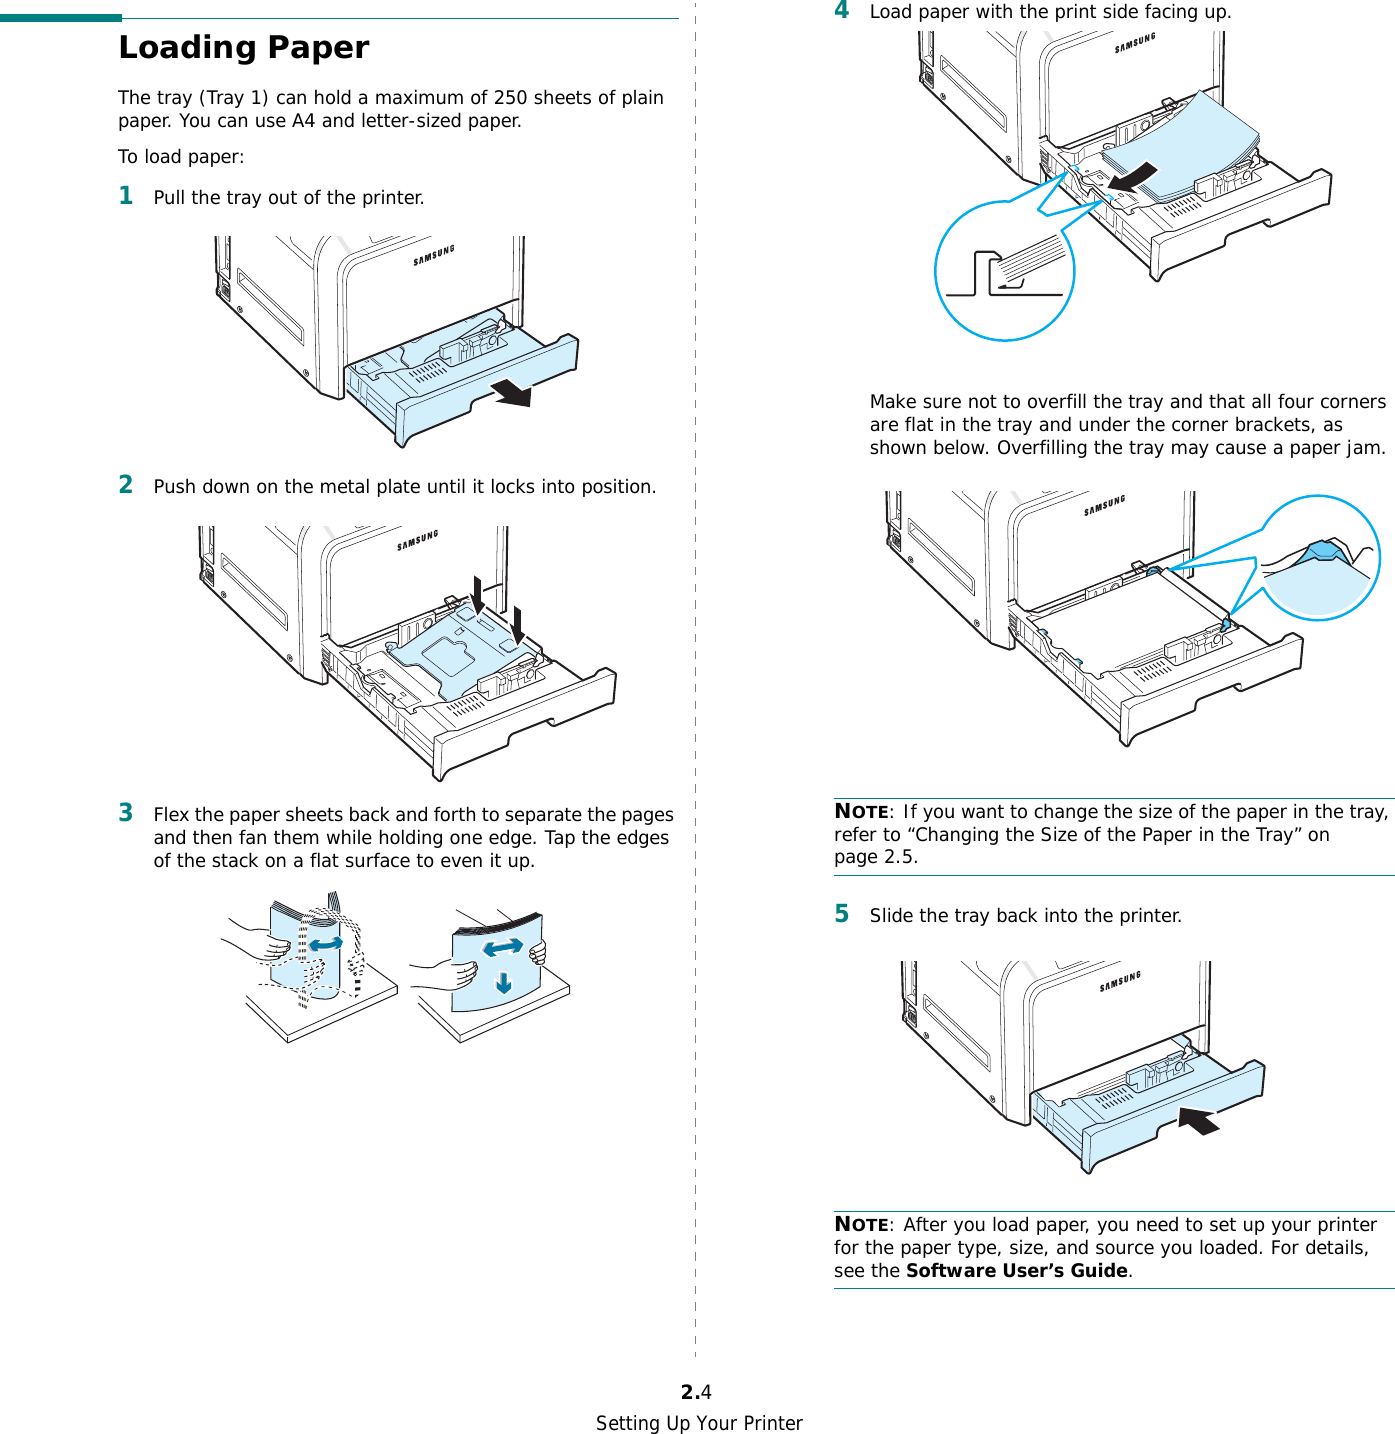 Setting Up Your Printer2.4Loading PaperThe tray (Tray 1) can hold a maximum of 250 sheets of plain paper. You can use A4 and letter-sized paper.To load paper:1Pull the tray out of the printer.2Push down on the metal plate until it locks into position.3Flex the paper sheets back and forth to separate the pages and then fan them while holding one edge. Tap the edges of the stack on a flat surface to even it up.4Load paper with the print side facing up.Make sure not to overfill the tray and that all four corners are flat in the tray and under the corner brackets, as shown below. Overfilling the tray may cause a paper jam.NOTE: If you want to change the size of the paper in the tray, refer to “Changing the Size of the Paper in the Tray” on page 2.5.5Slide the tray back into the printer.NOTE: After you load paper, you need to set up your printer for the paper type, size, and source you loaded. For details, see the Software User’s Guide.